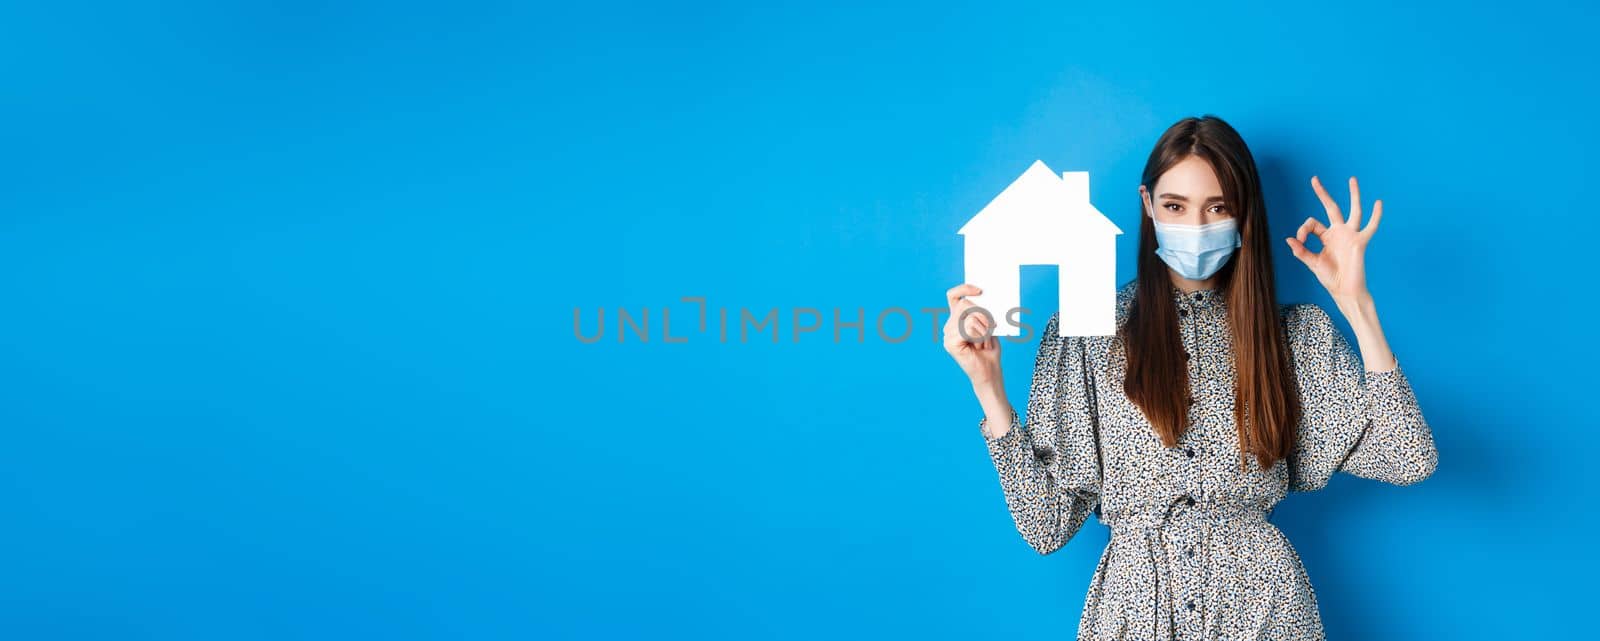 Real estate, covid-19 and pandemic concept. Candid woman in medical mask showing okay sign and paper house cutout, selling property, standing on blue background.